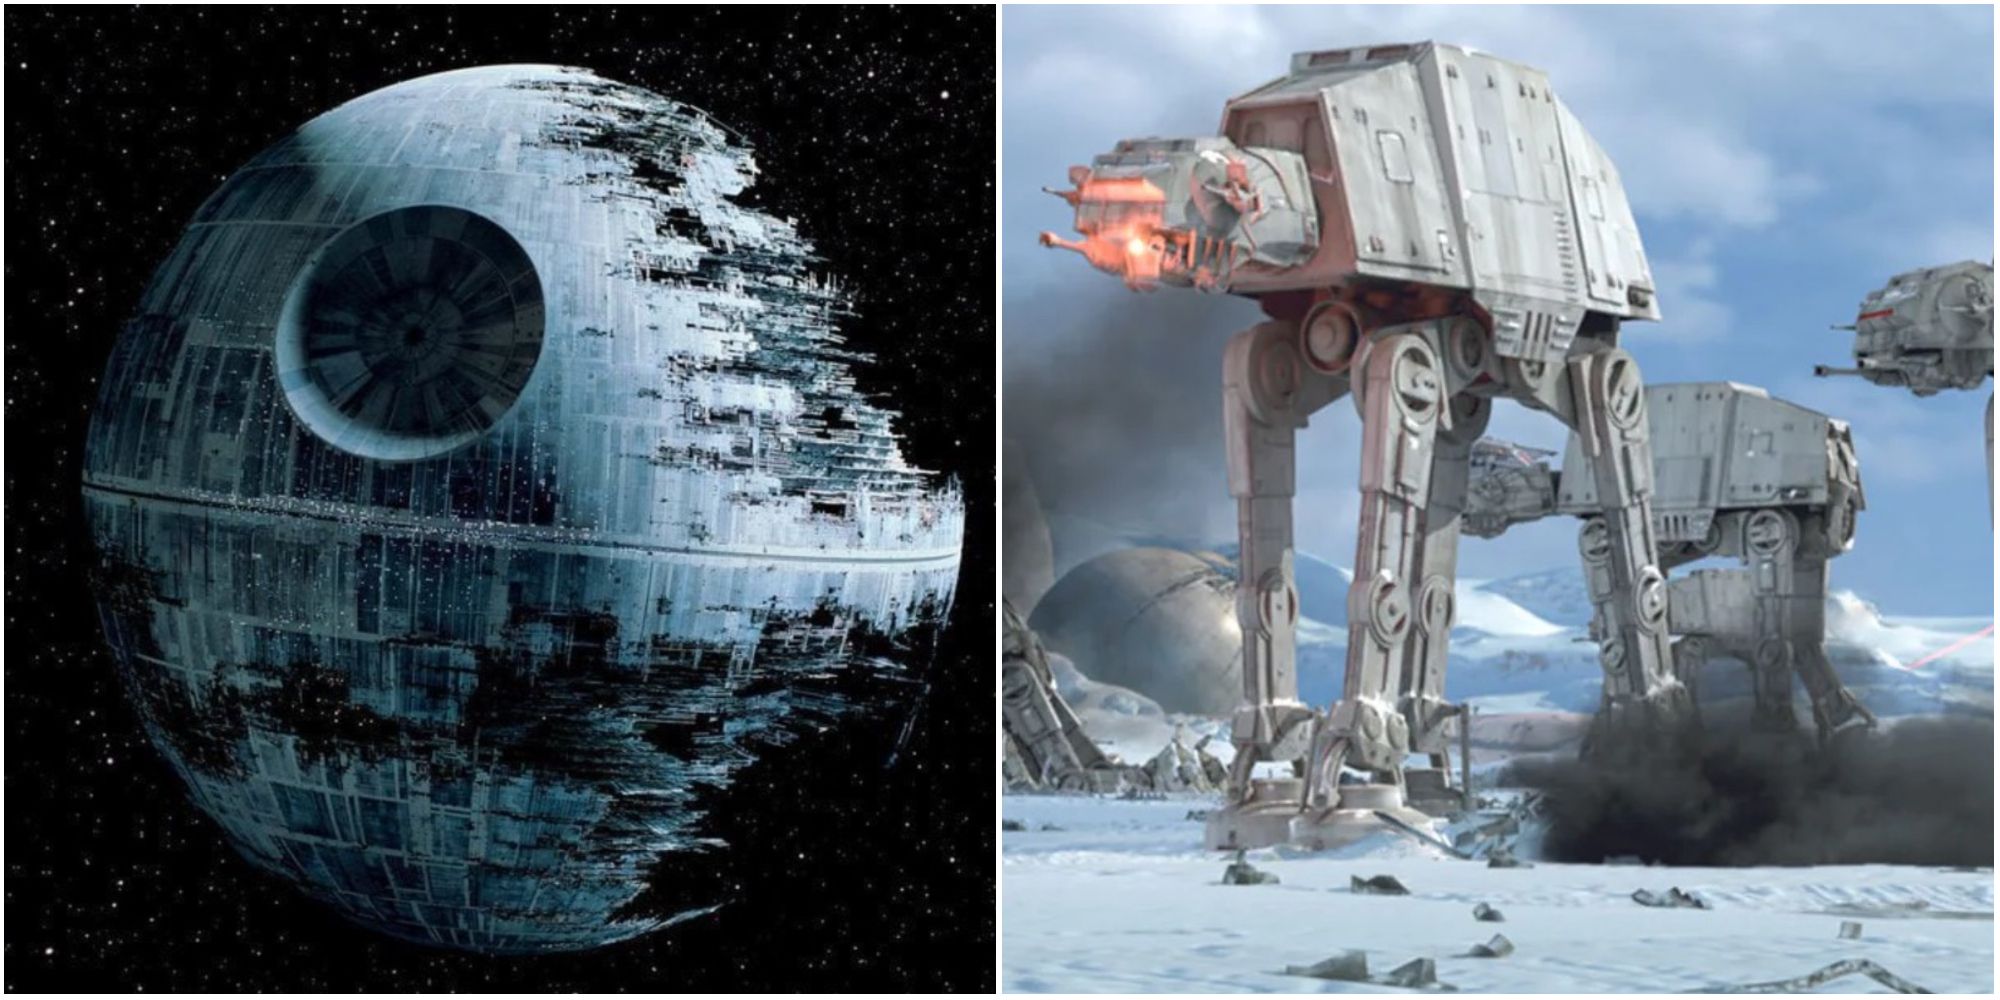 Death Star and AT-AT Walker in Star Wars